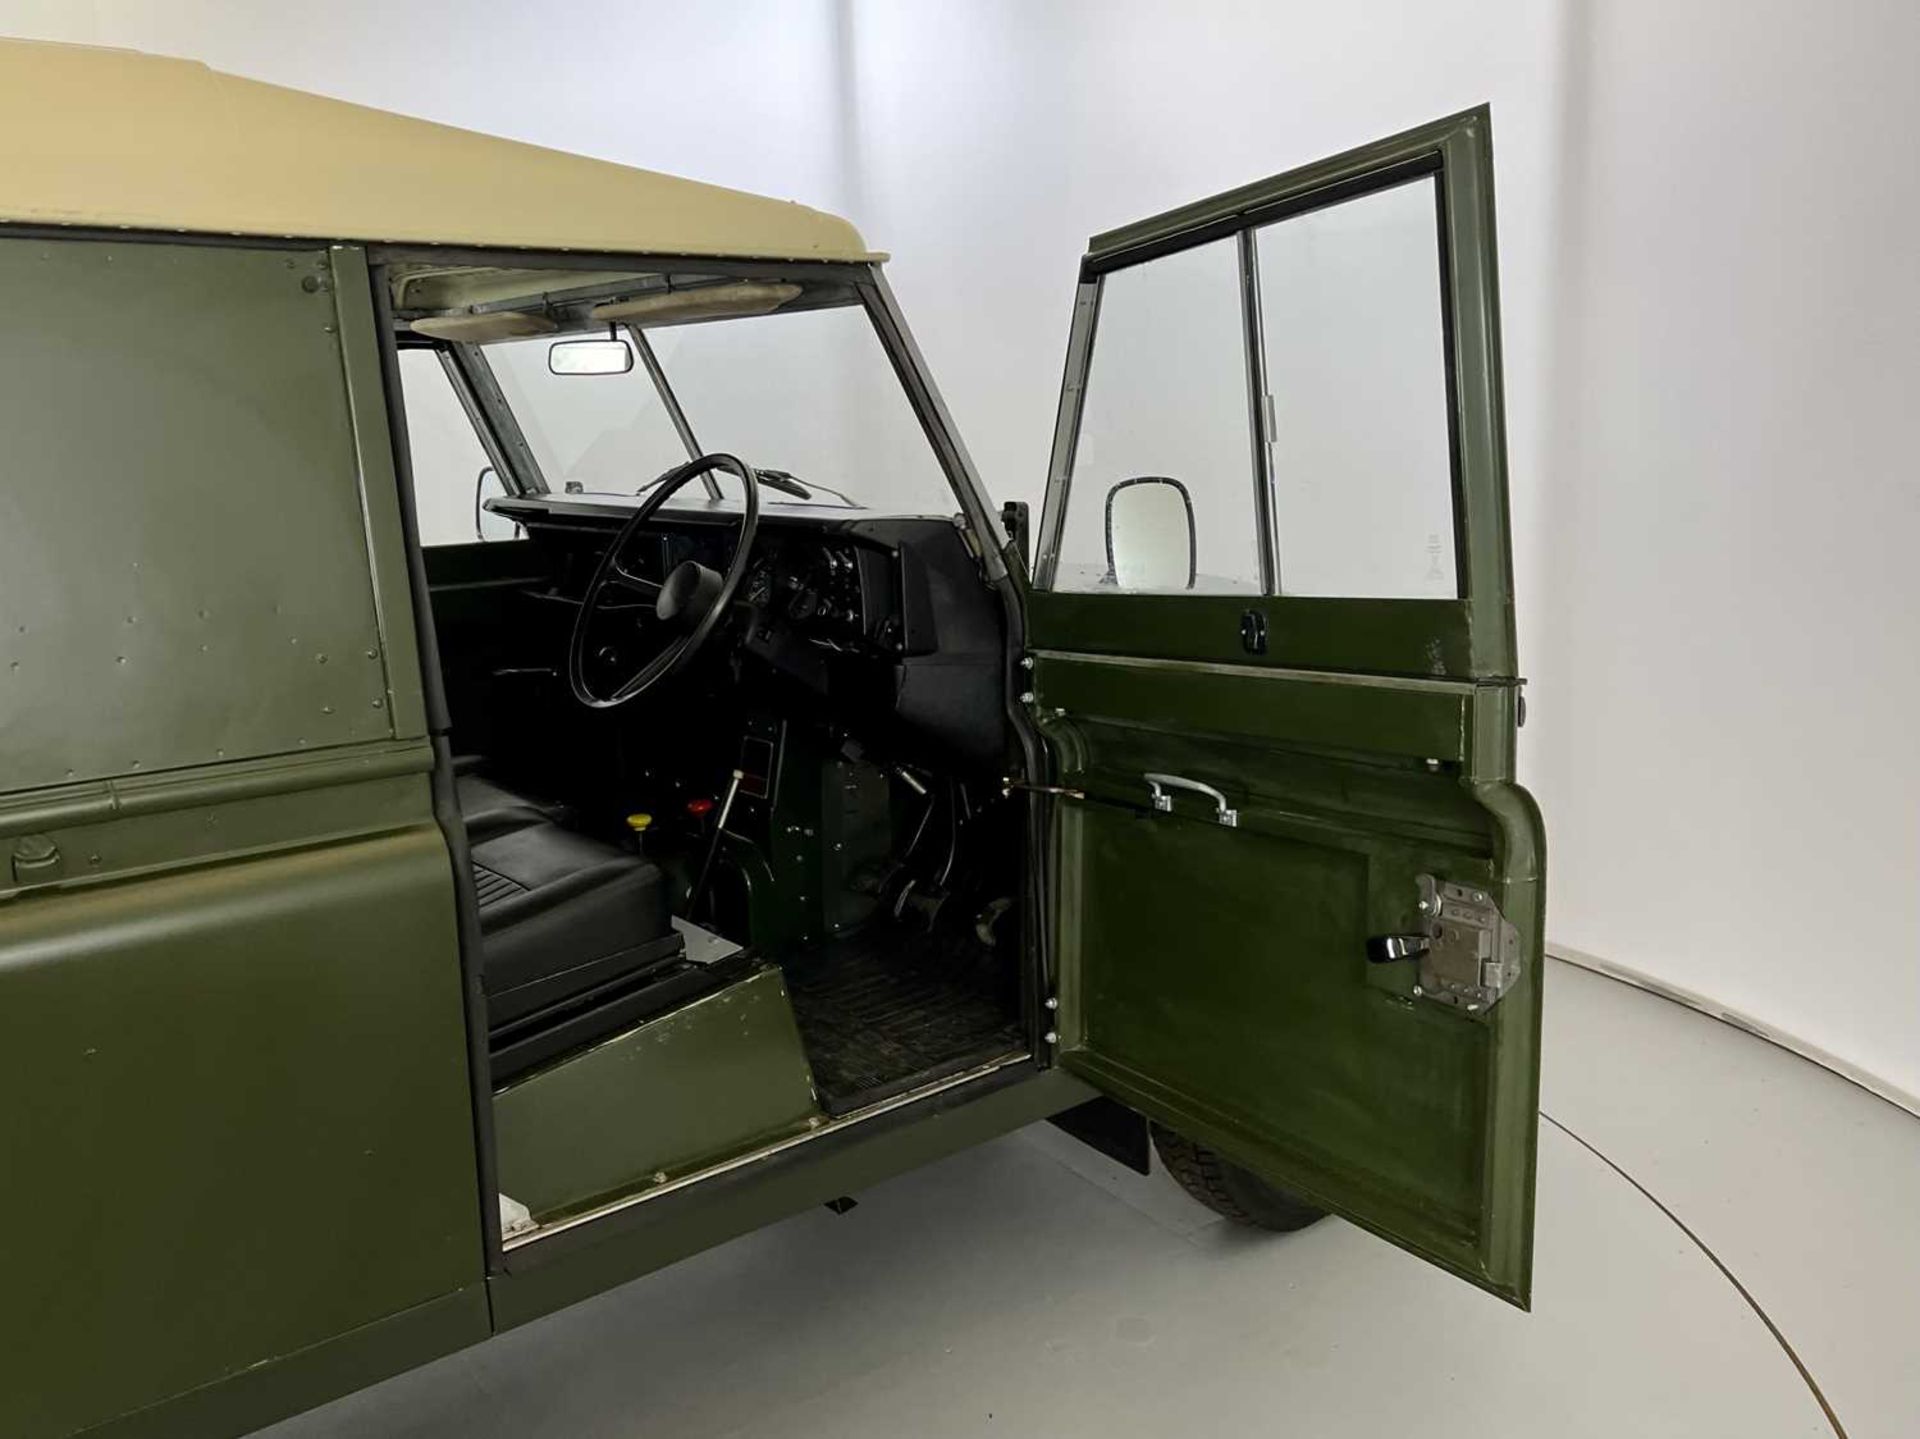 1981 Land Rover Series 3 - 6 Cylinder - Image 18 of 31